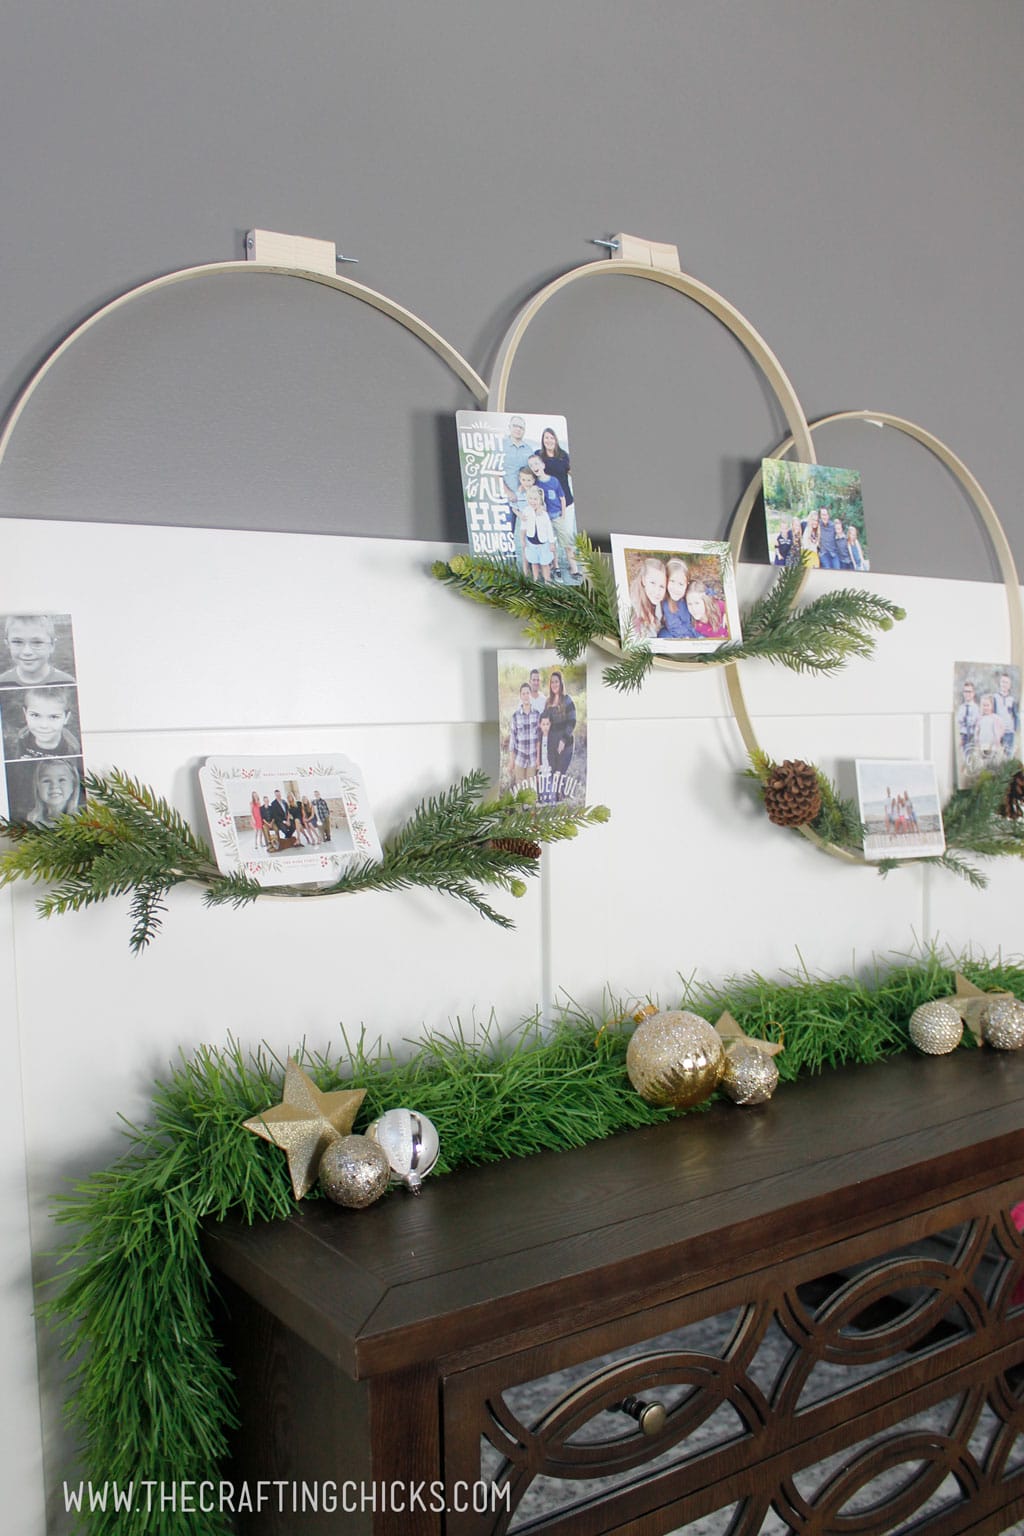 Embroidery hoop wreaths with faux pine hanging on a wall and decorated with Christmas cards